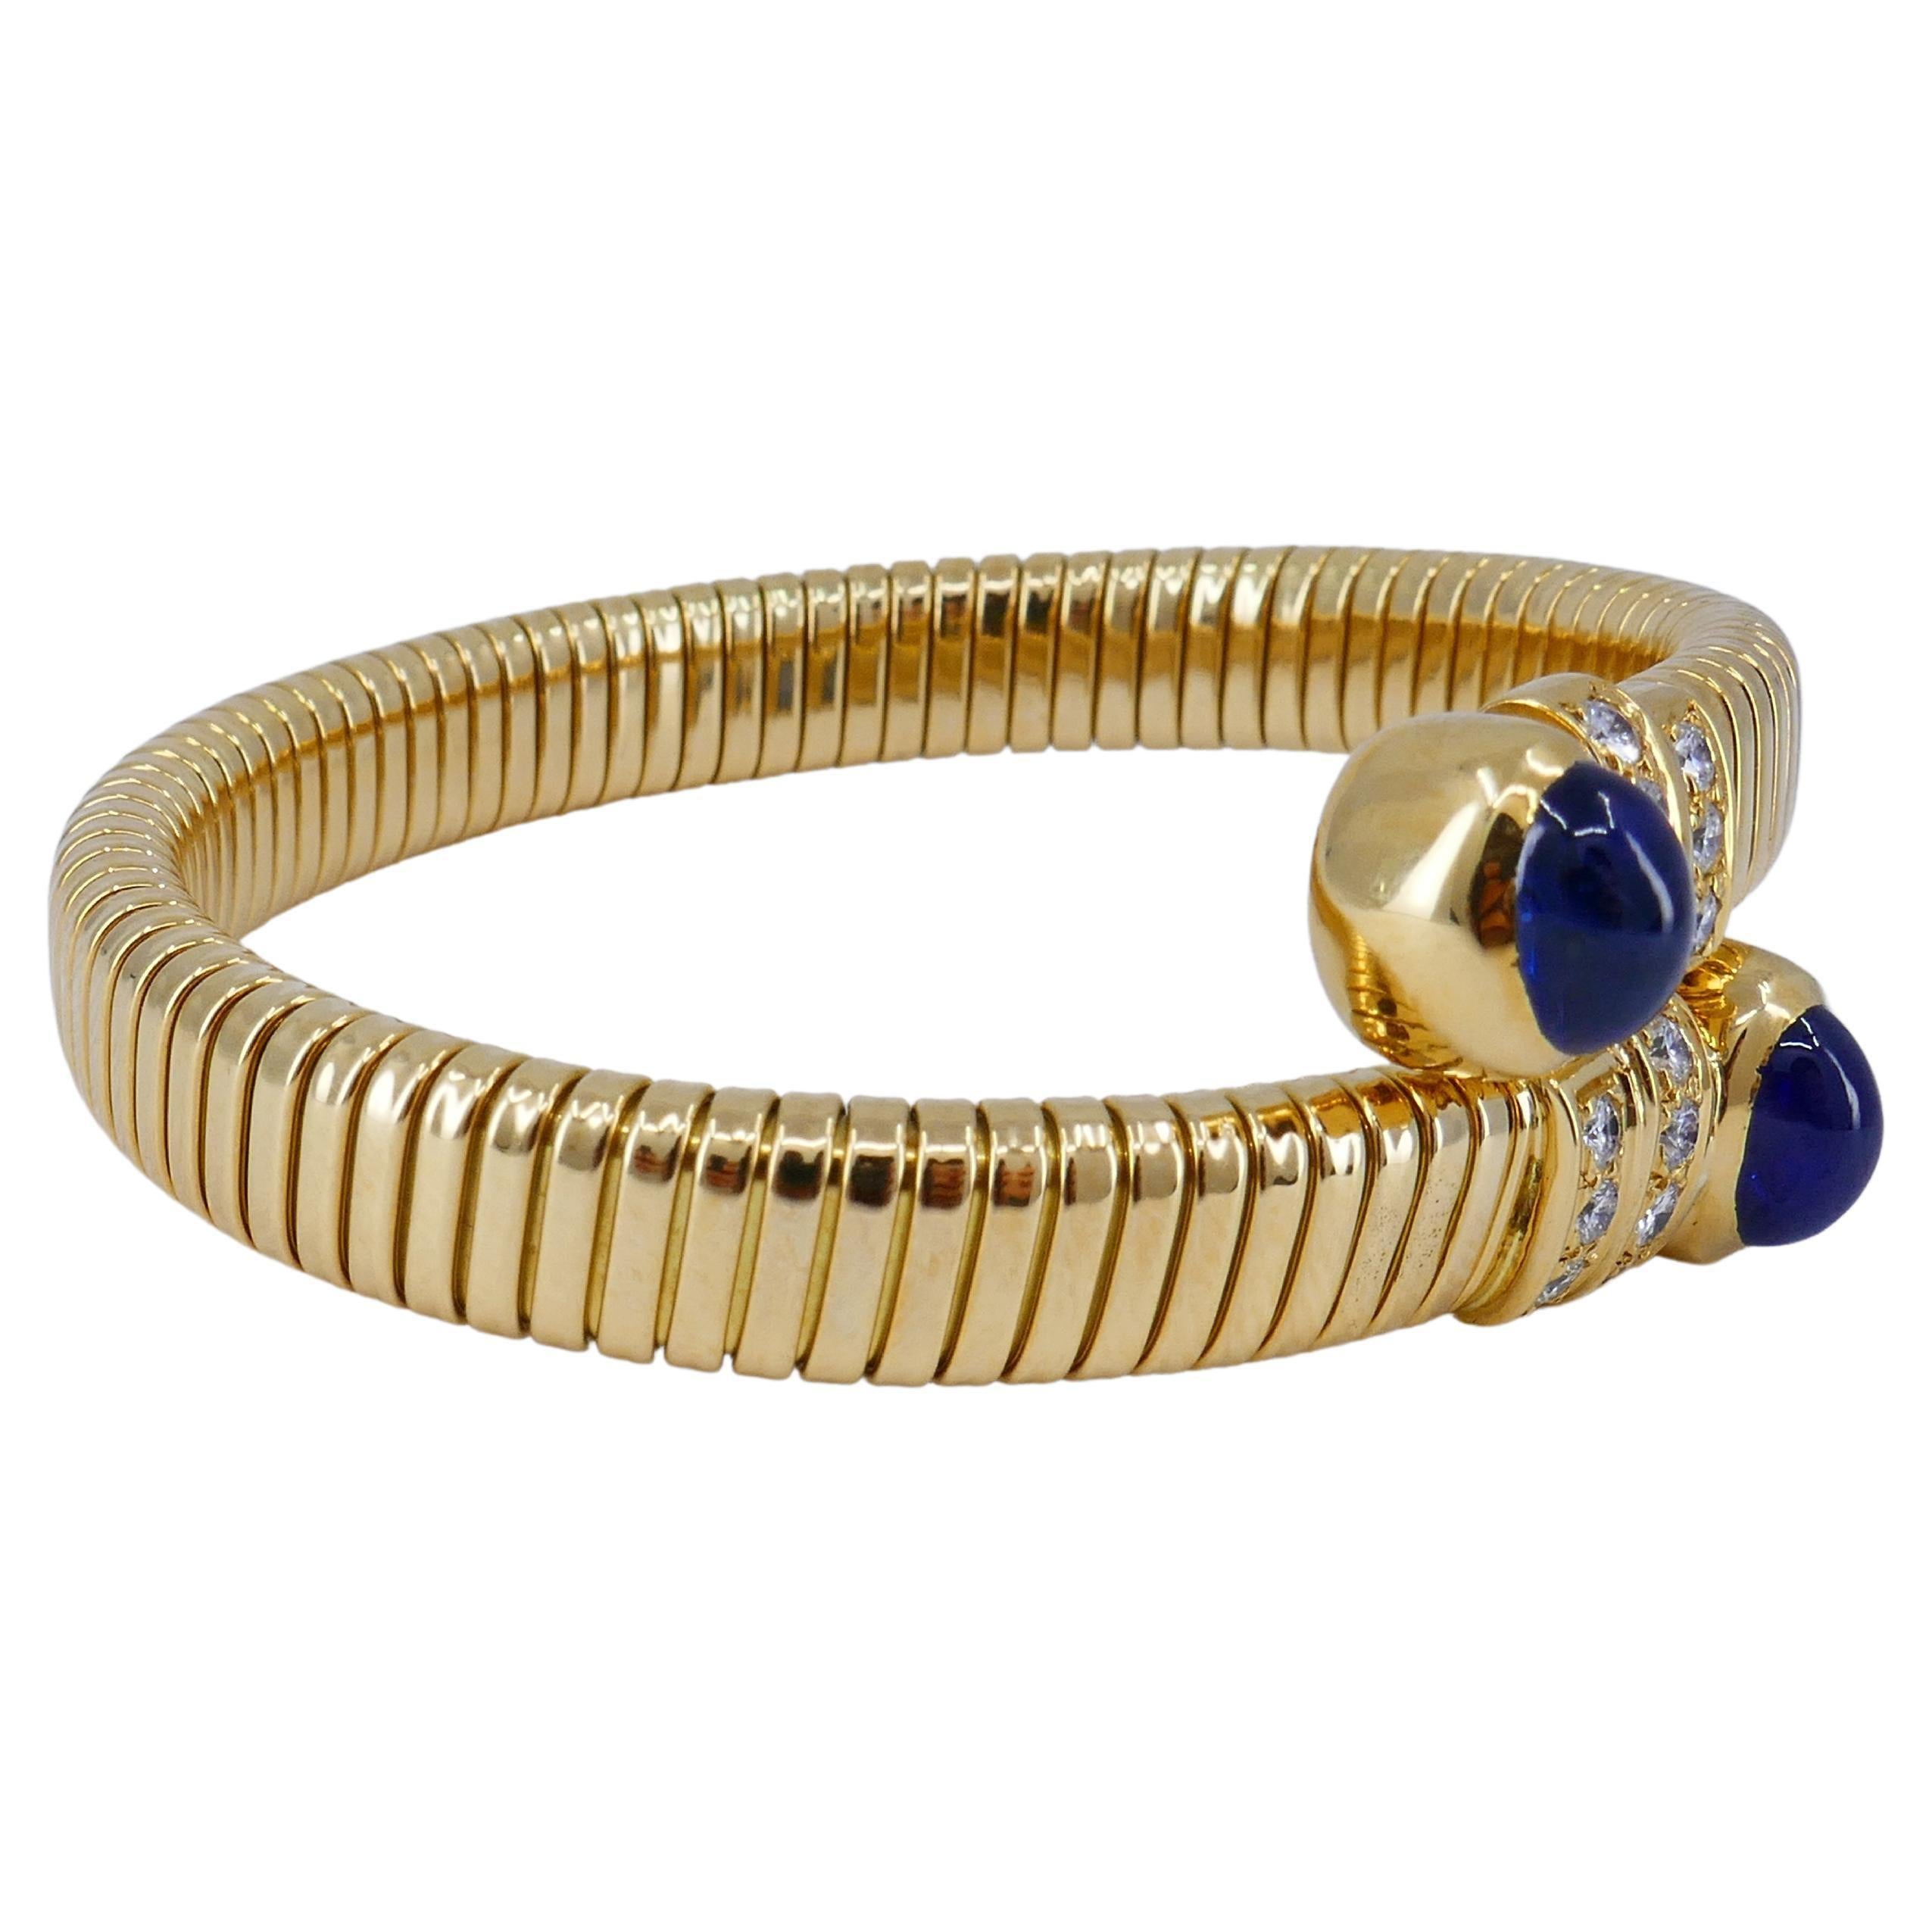 An 18k gold tubogas bracelet by Adler Geneve, features cabochon sapphires and diamond.
The diamonds are brilliant cut, channel set. The stones are staged in two horizontal rows. The bracelet is crafted as a wraparound tubogas with one end being on